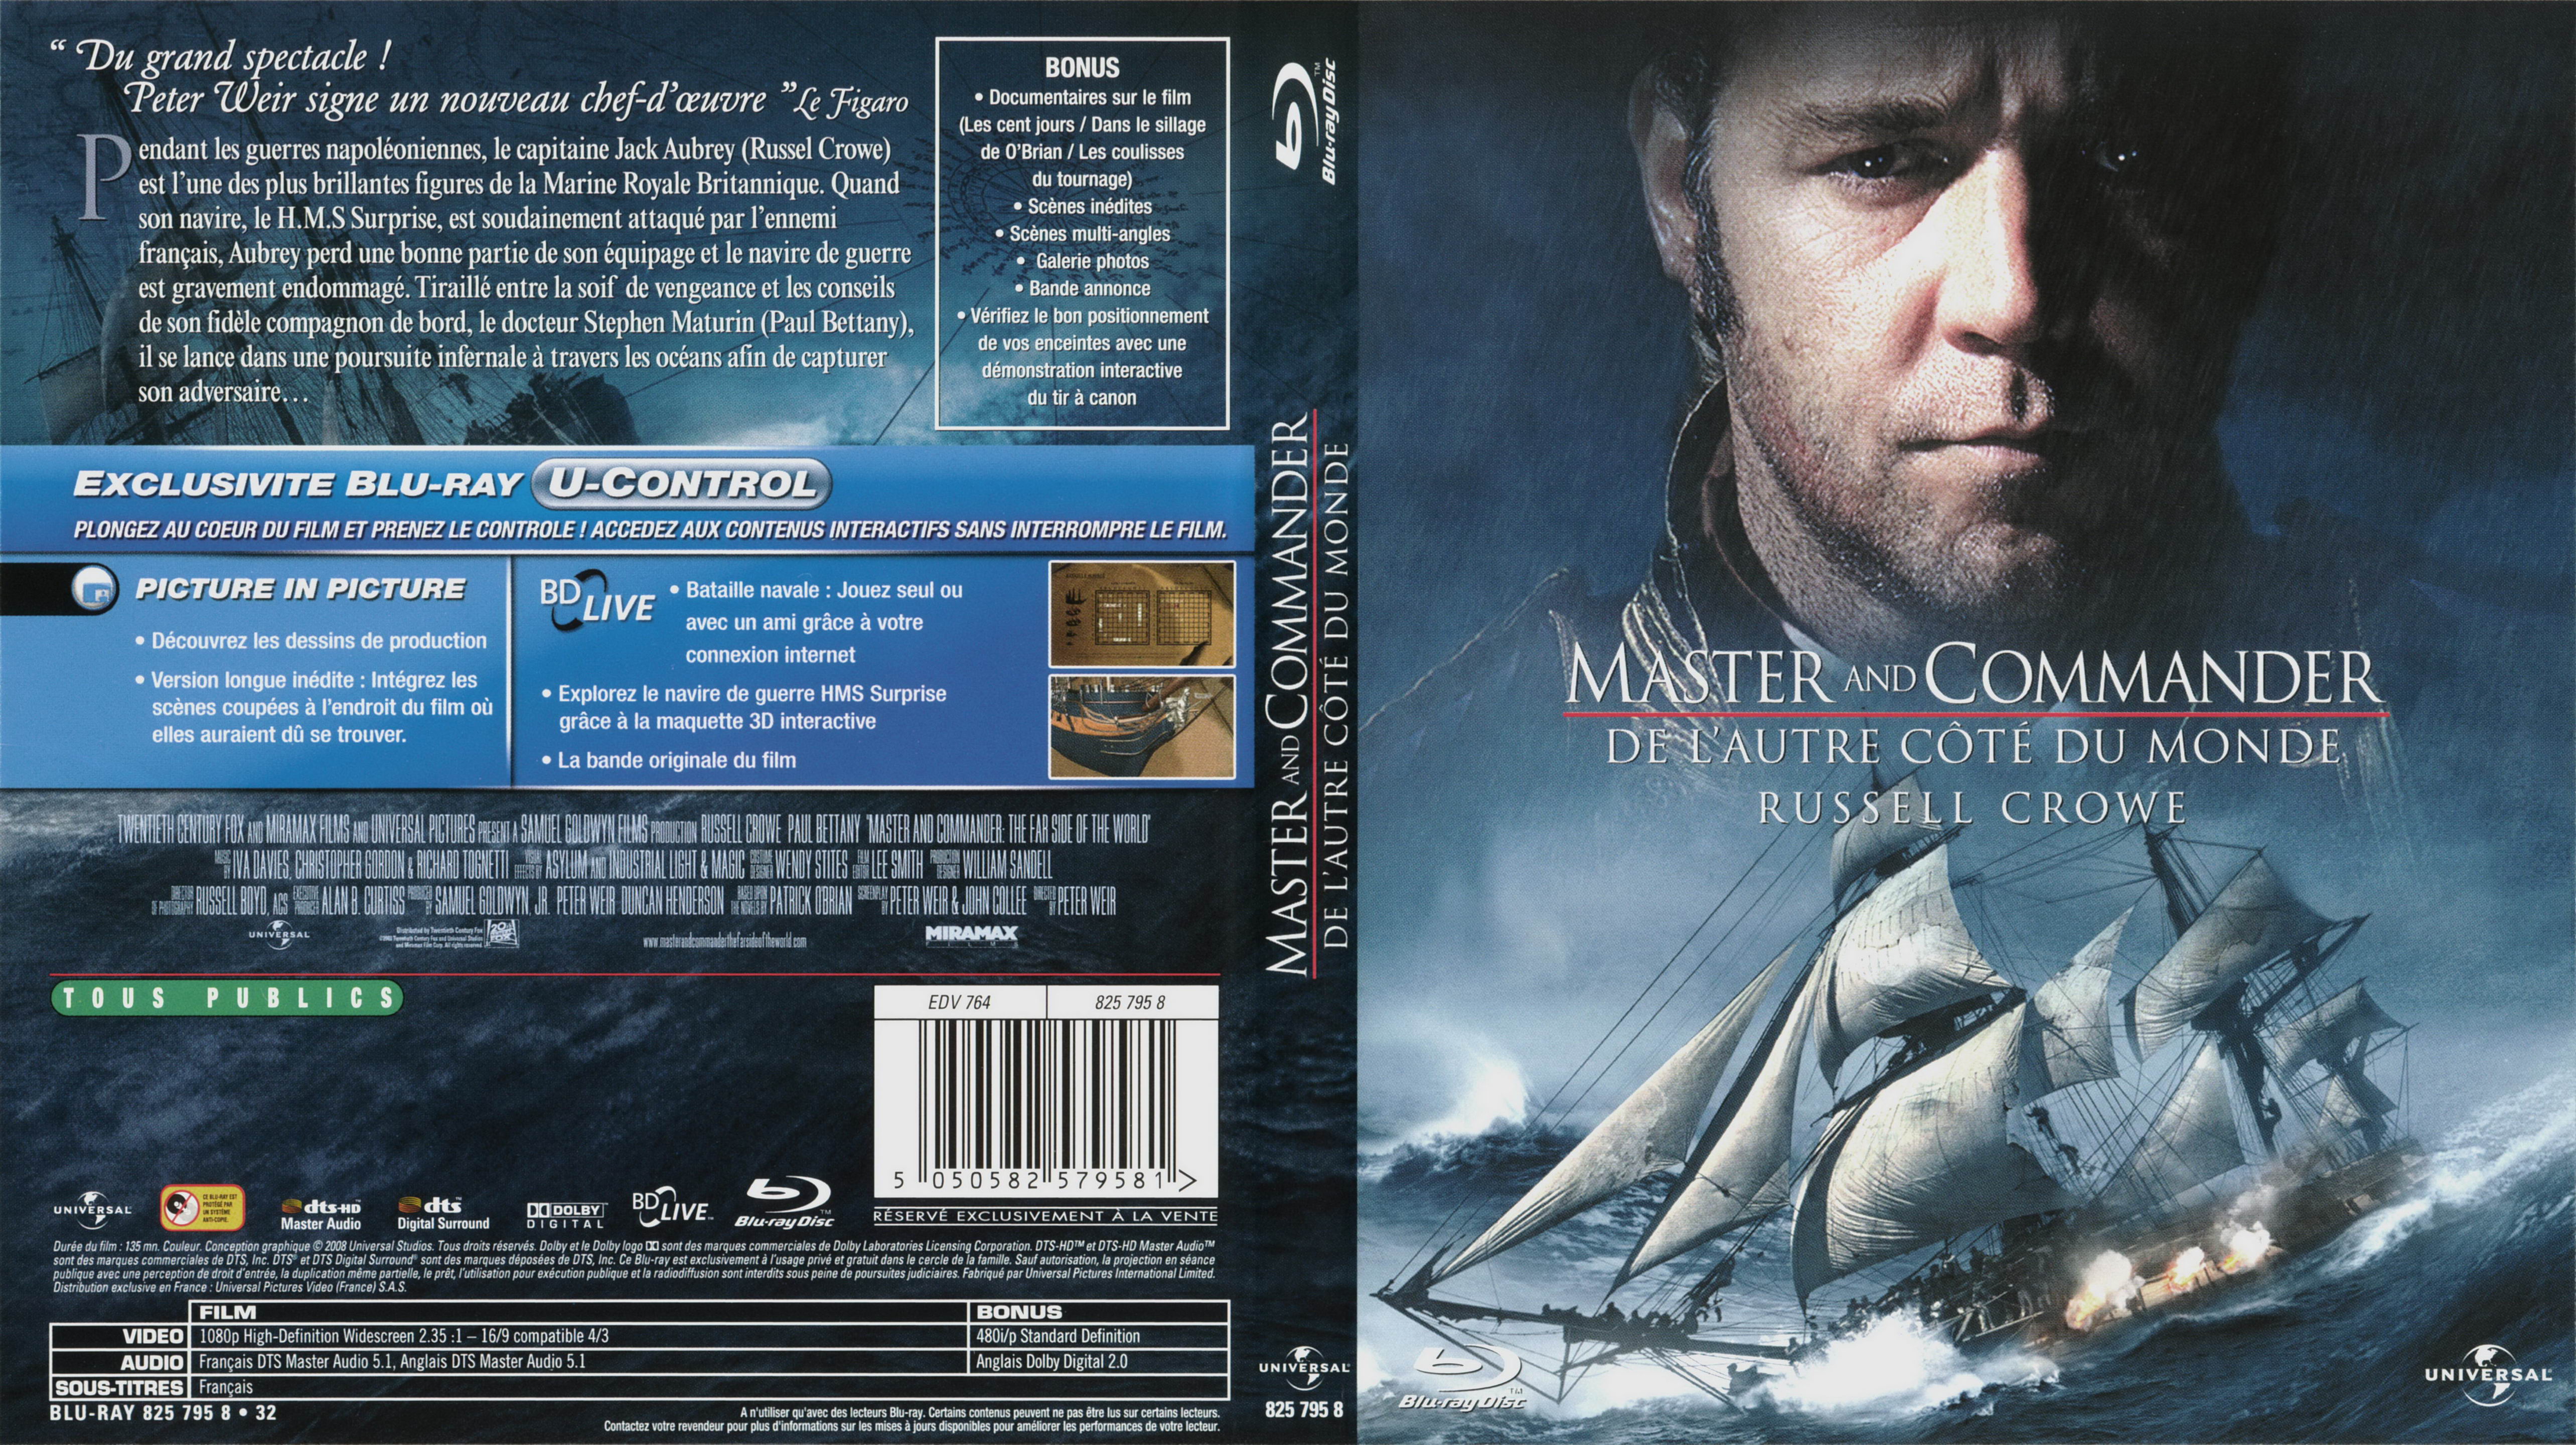 Jaquette DVD Master and Commander (BLU-RAY)